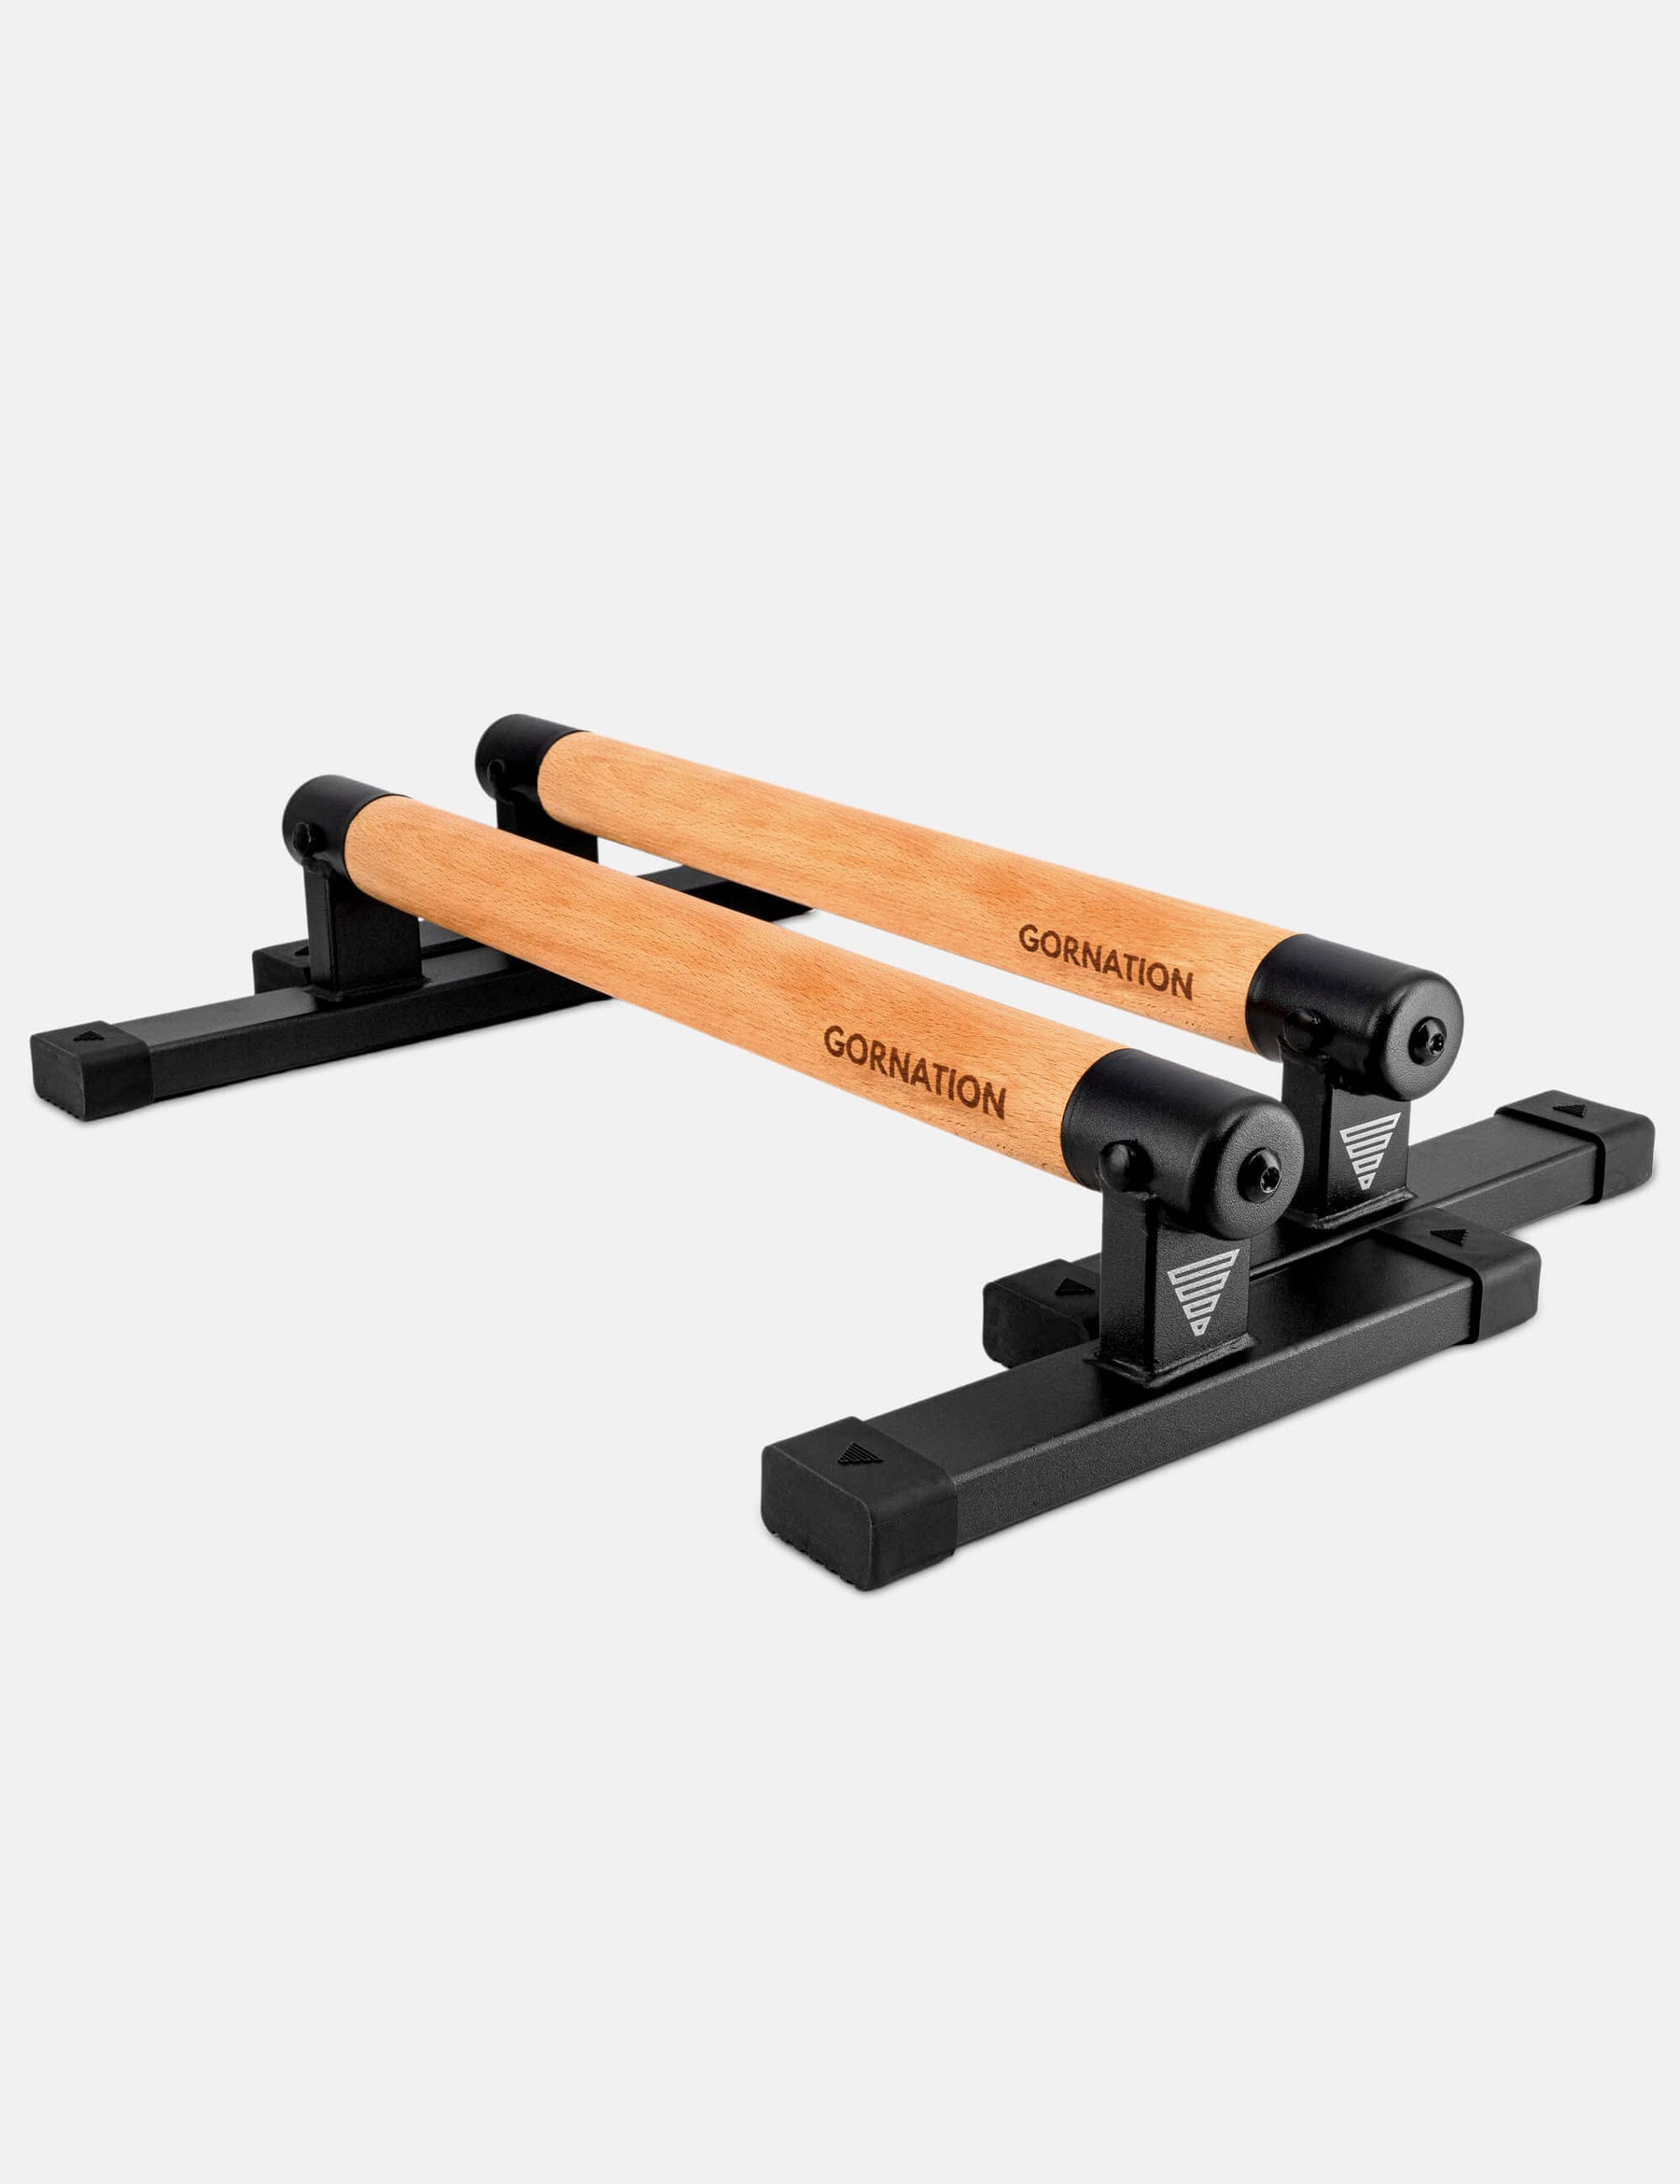 Parallettes Pro for Calisthenics Home & Outdoor Workout